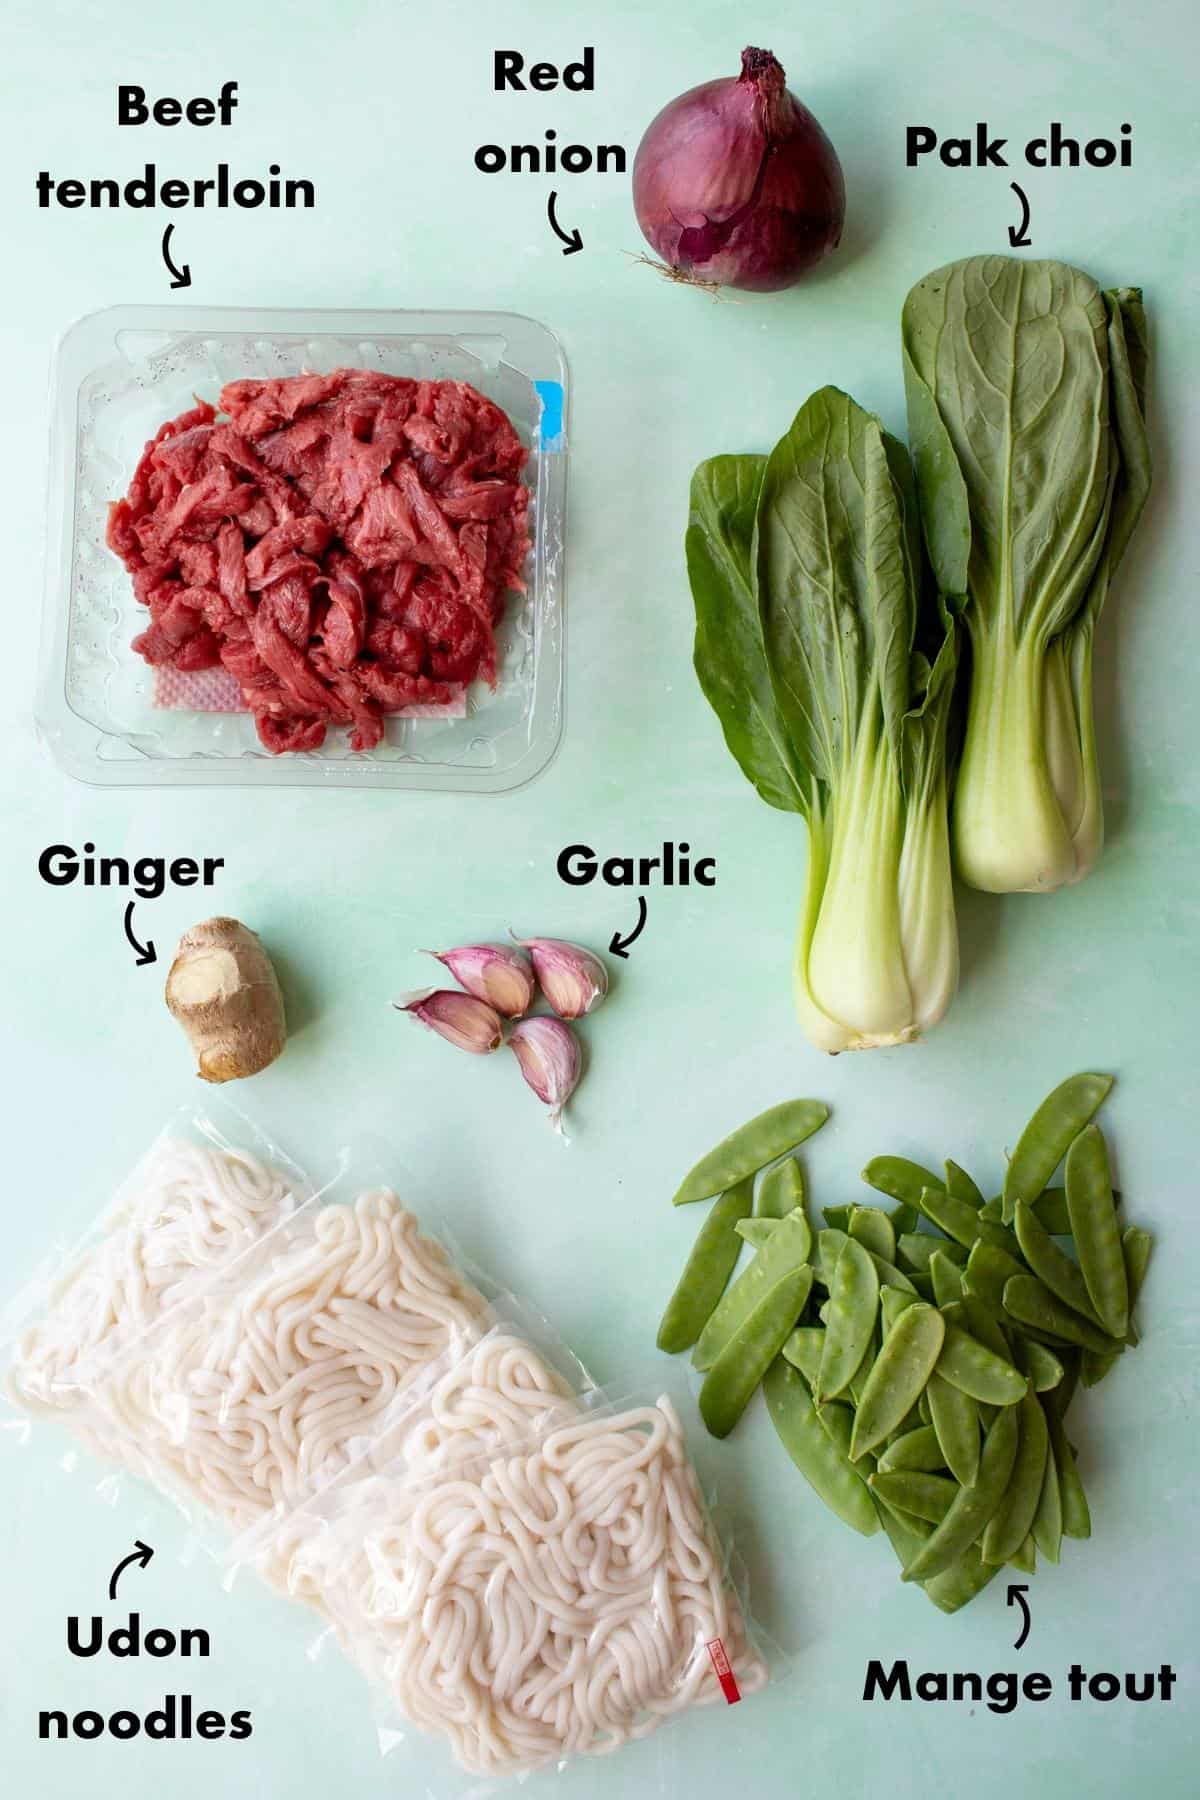 udon noodles recipe with beef tenderloin and other Ingredients laid out on a pale blue background and labelled.